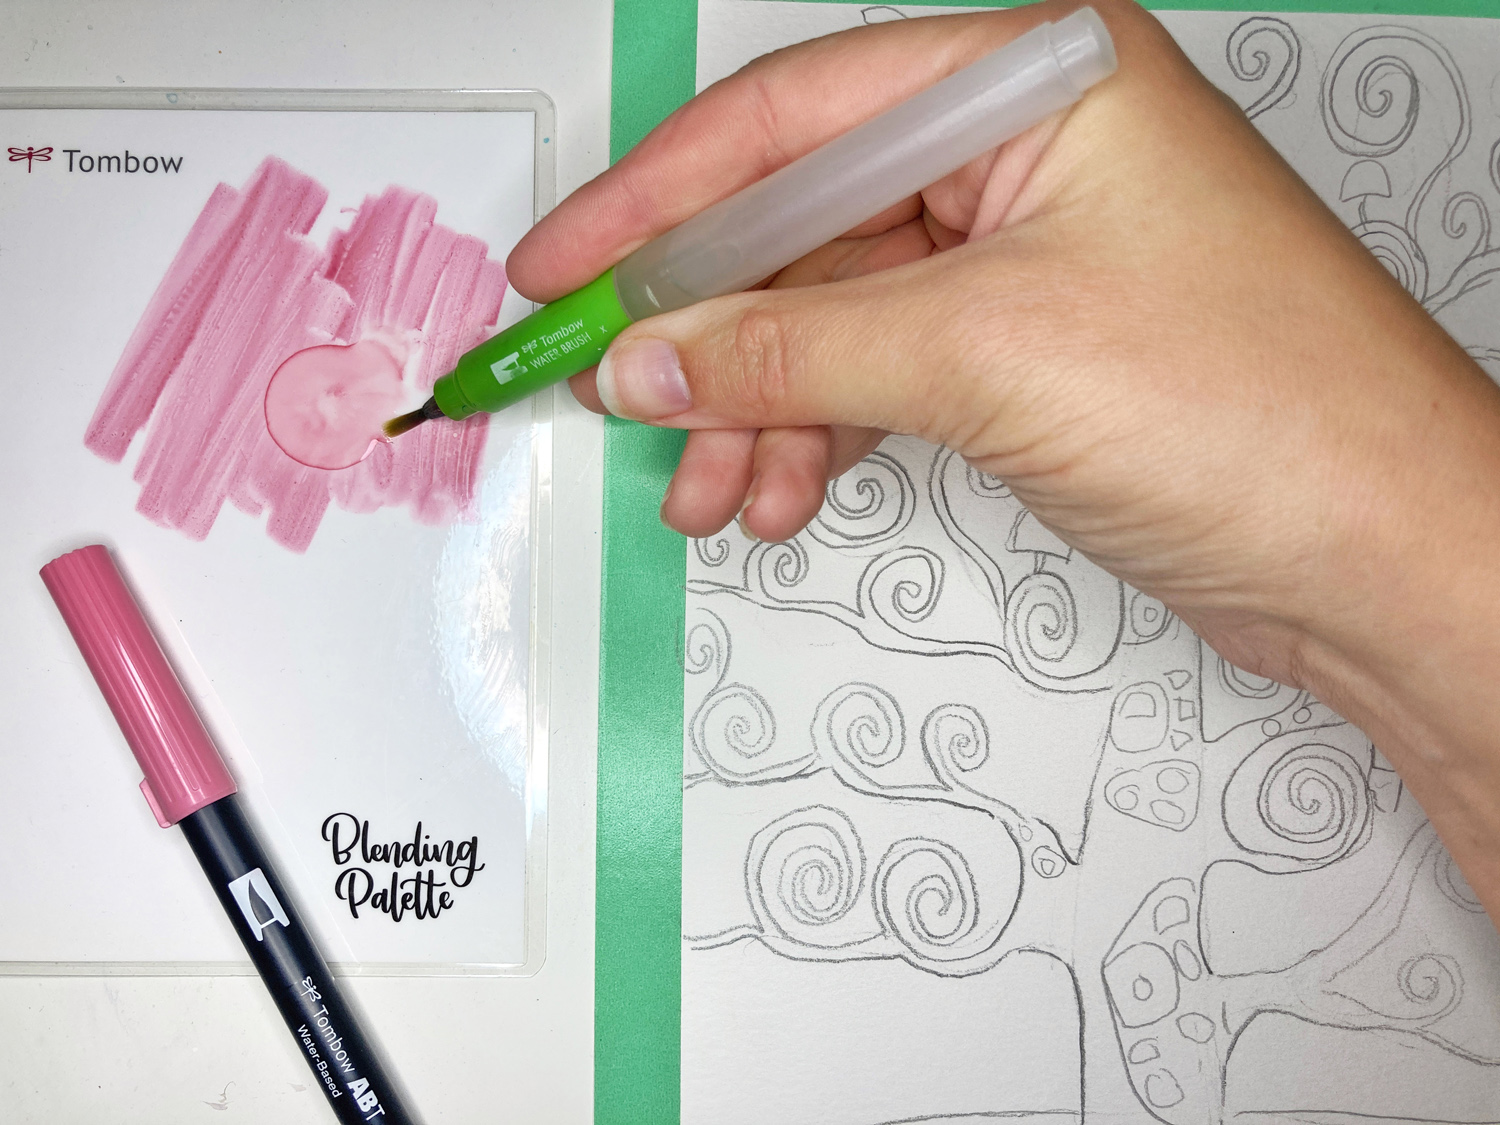 Learn how to Paint a DIY Tree of Life Watercolor Painting inspired by Gustav Klimt using this tutorial by Katie Smith on the Tombow USA Blog!